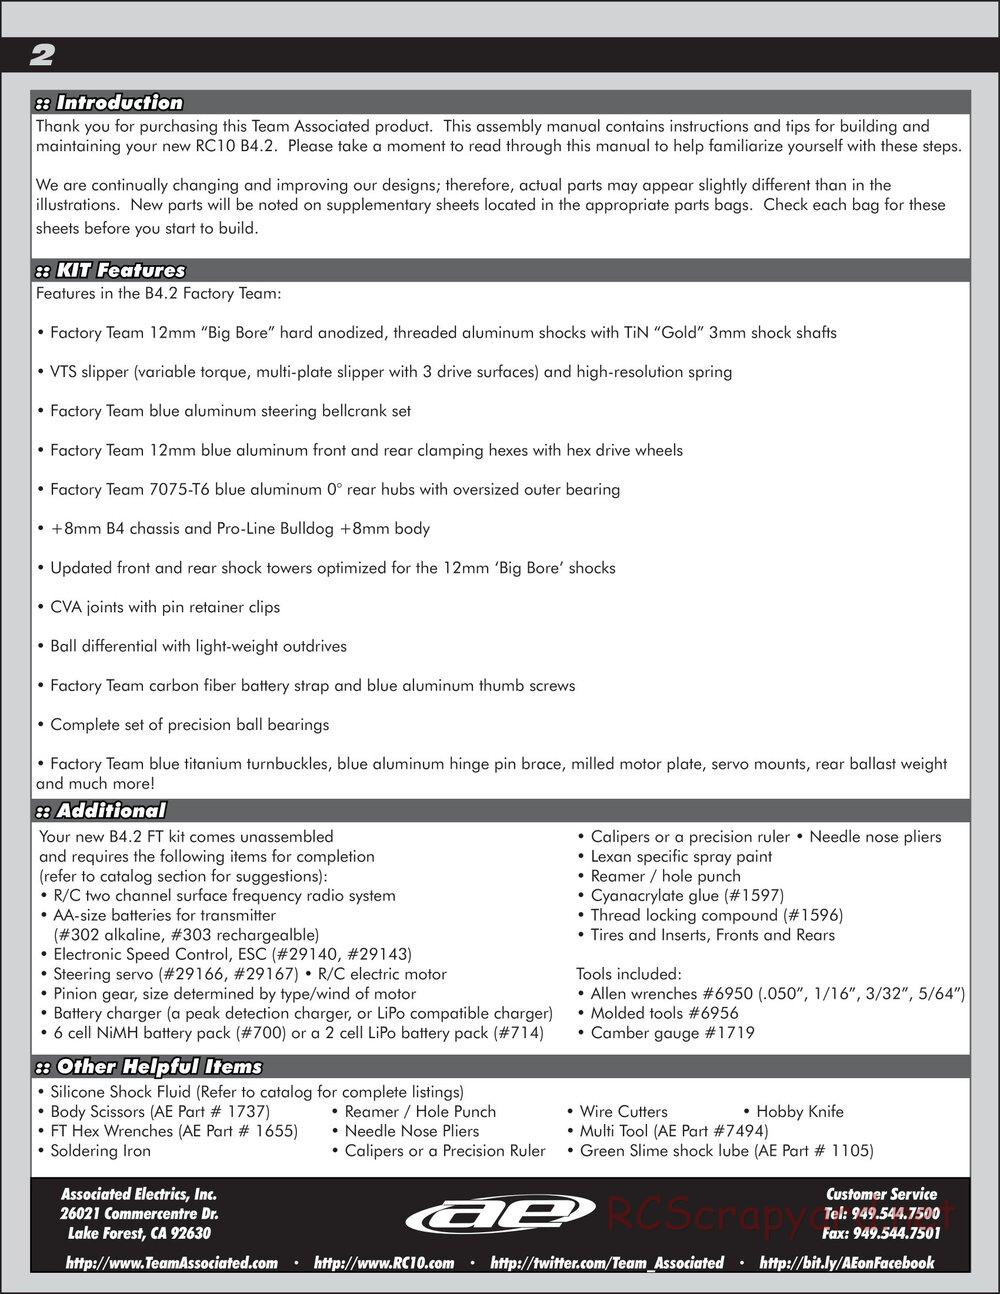 Team Associated - RC10 B4.2 Factory Team - Manual - Page 2